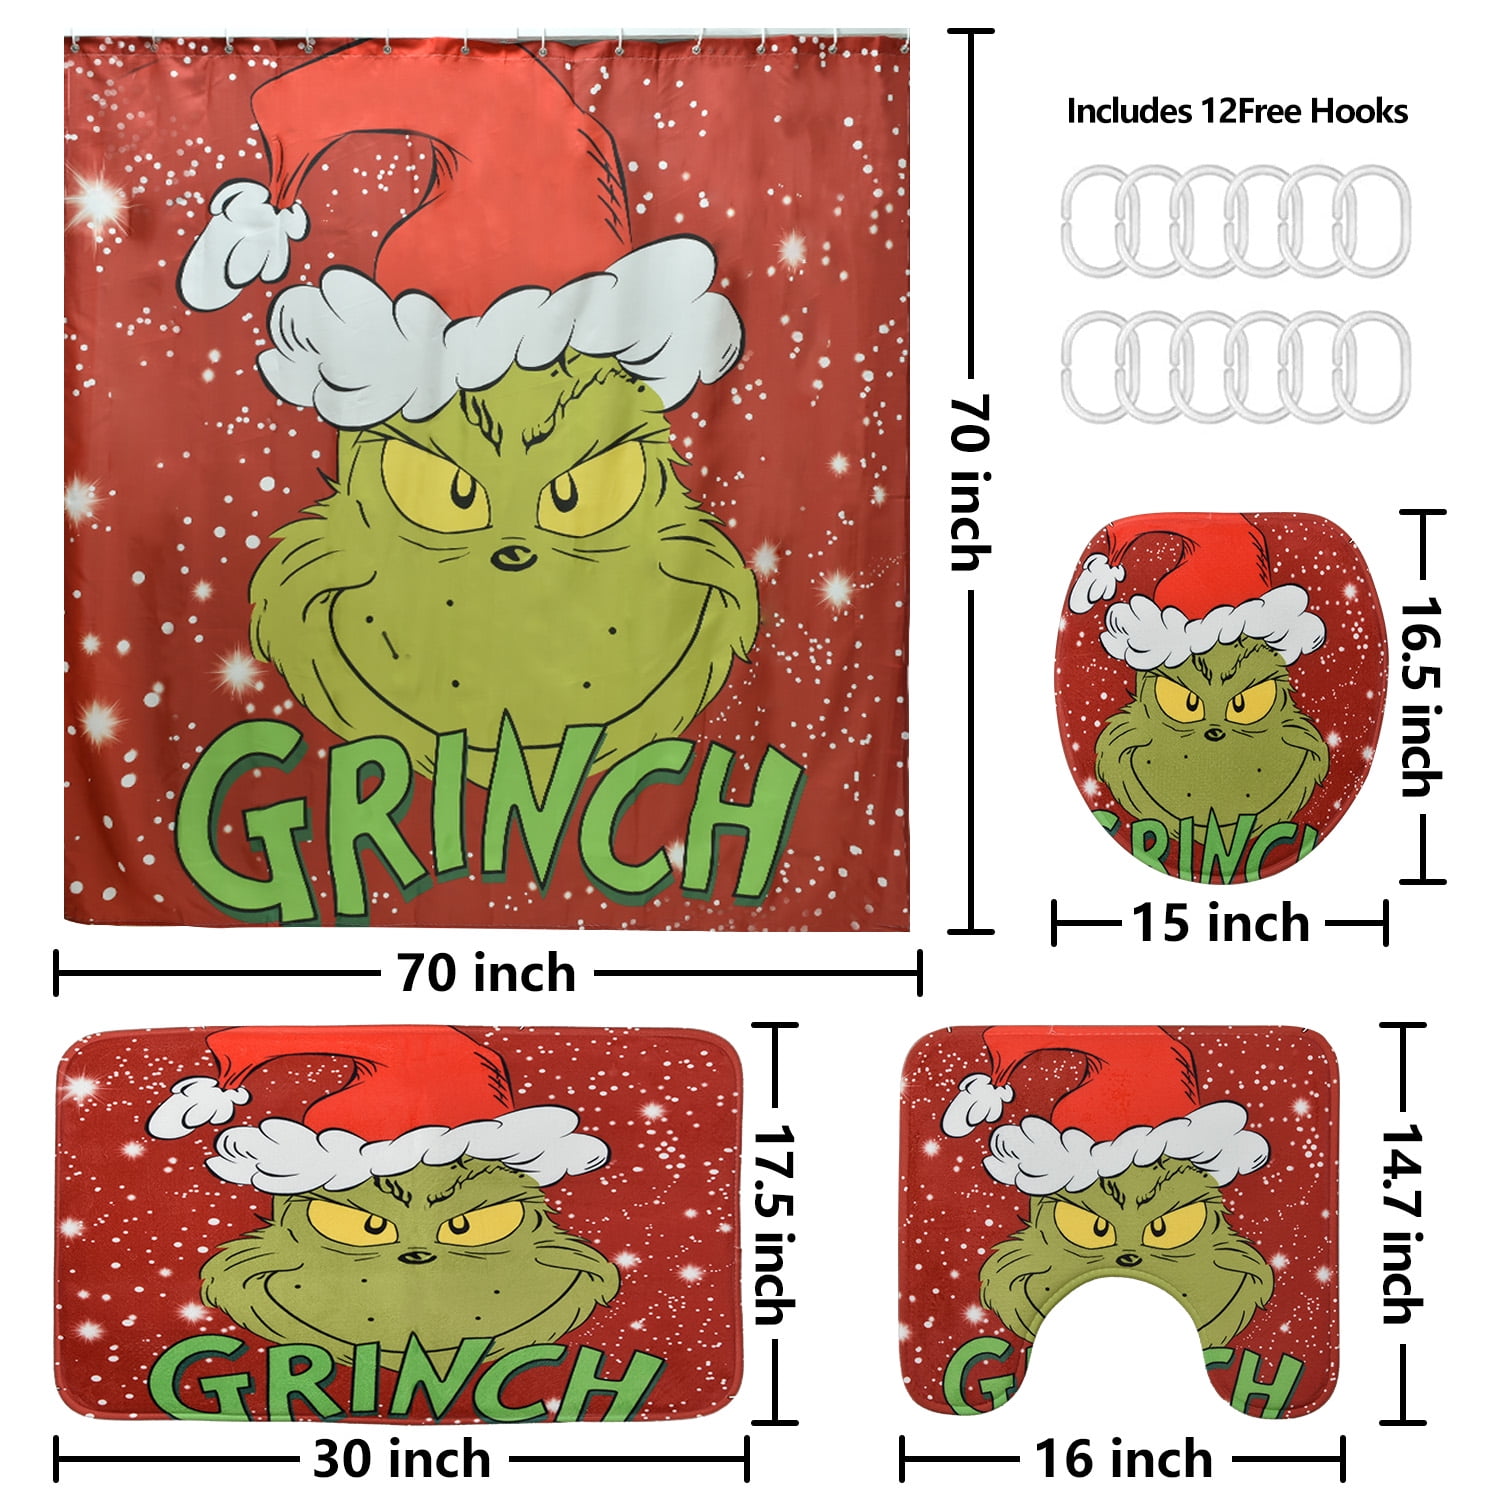 Mr Grinch Shower Curtain How The Grinch Stole Christmas Polyester